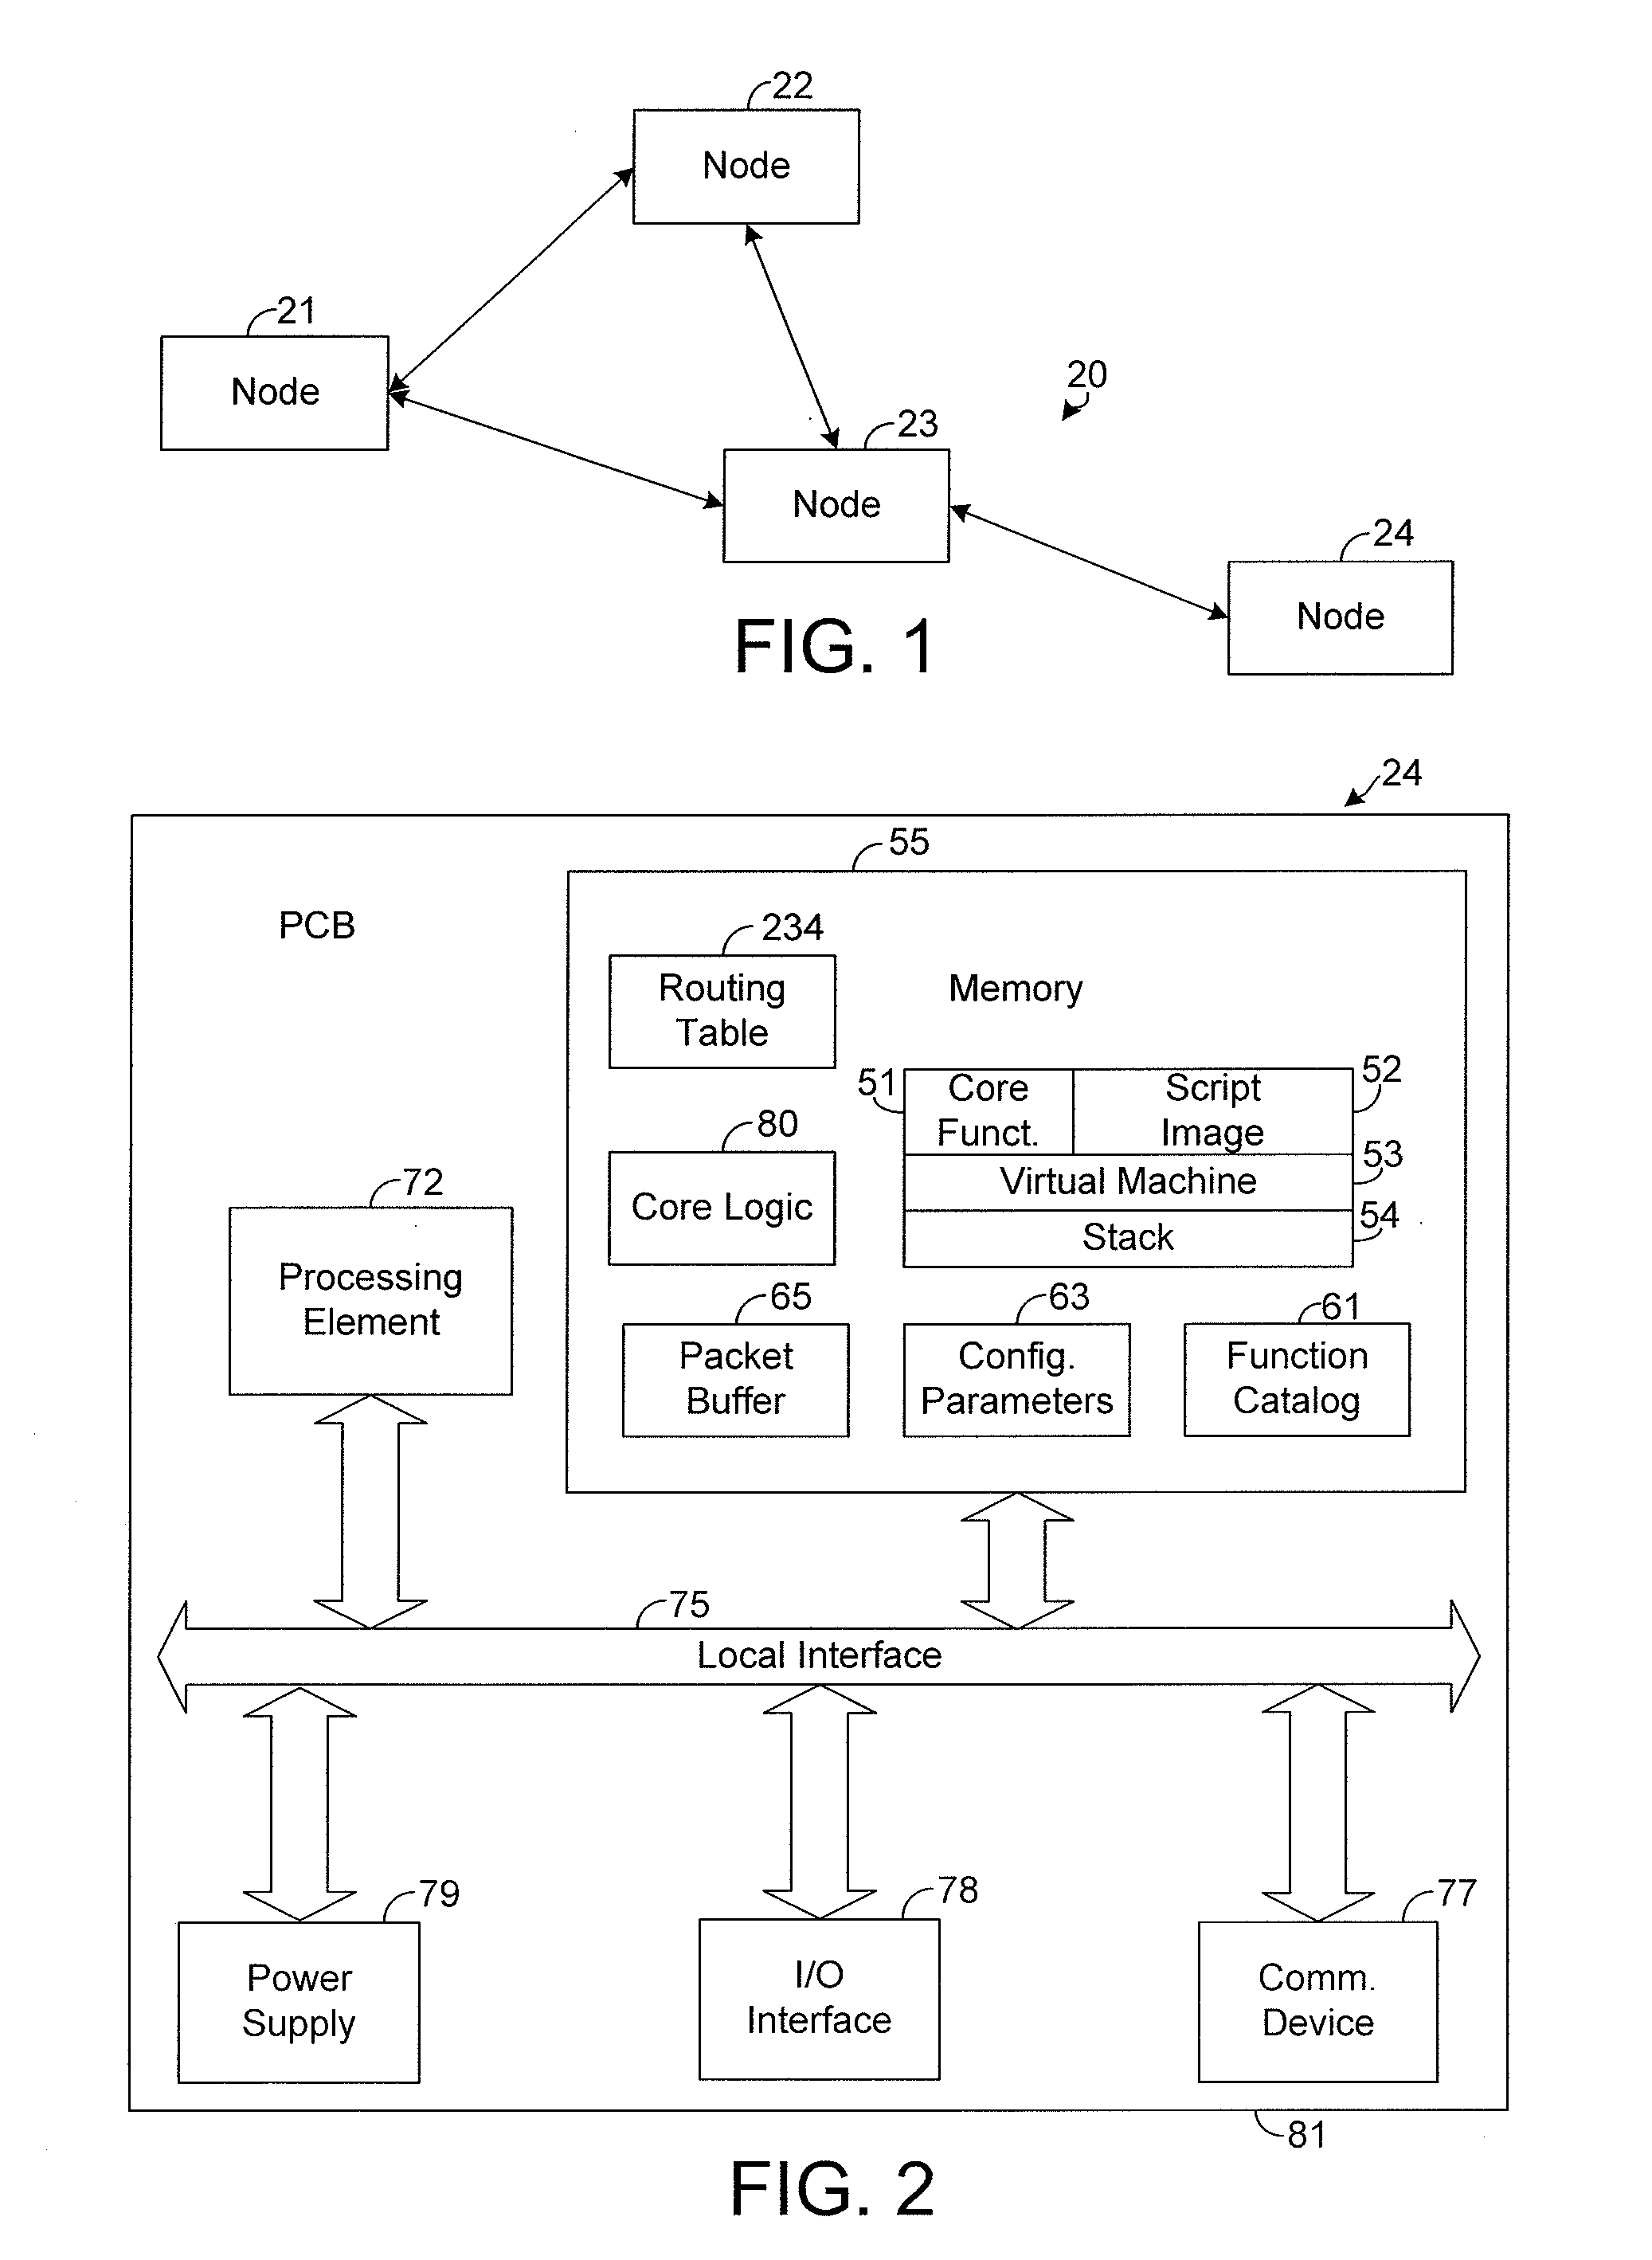 Systems and methods for performing topology discovery in wireless networks